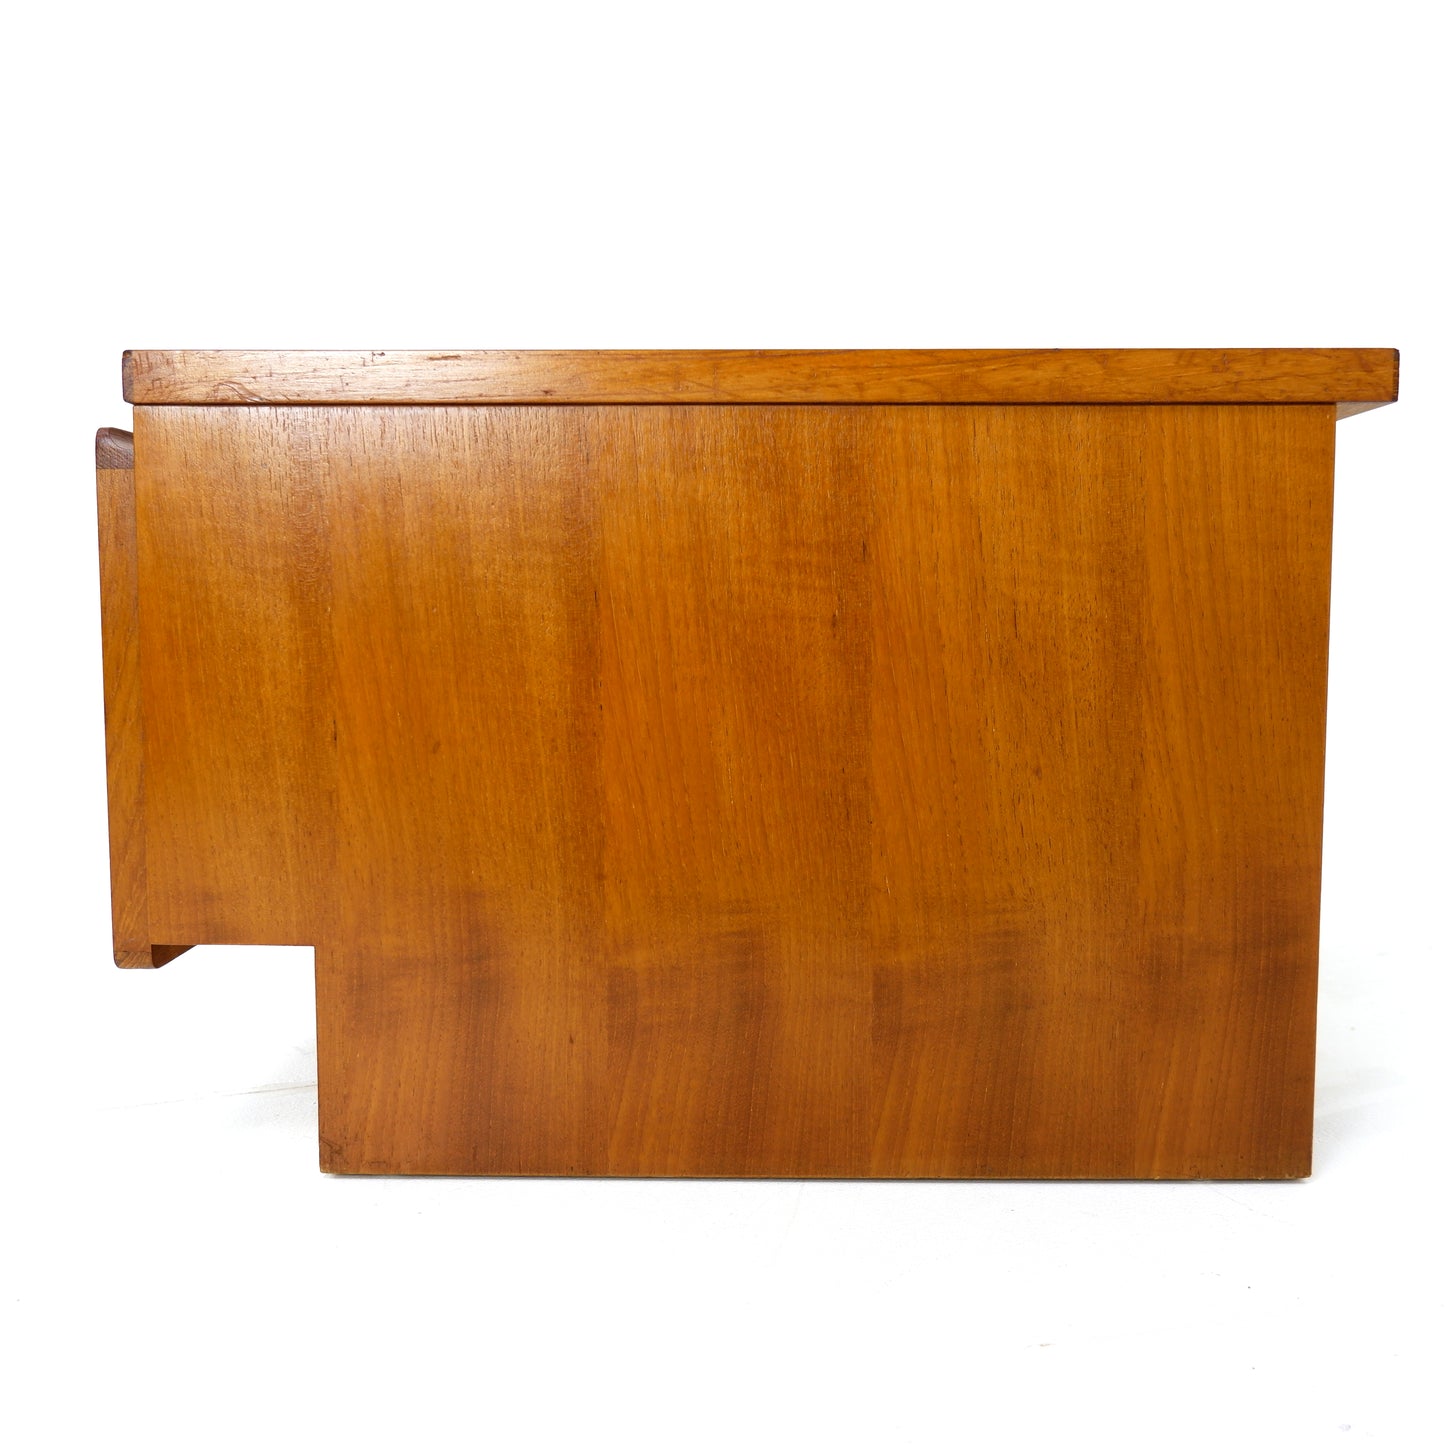 MCM Beaver & Tapley 33 Media/TV Stand in Teak with Draw - Mid Century Modern